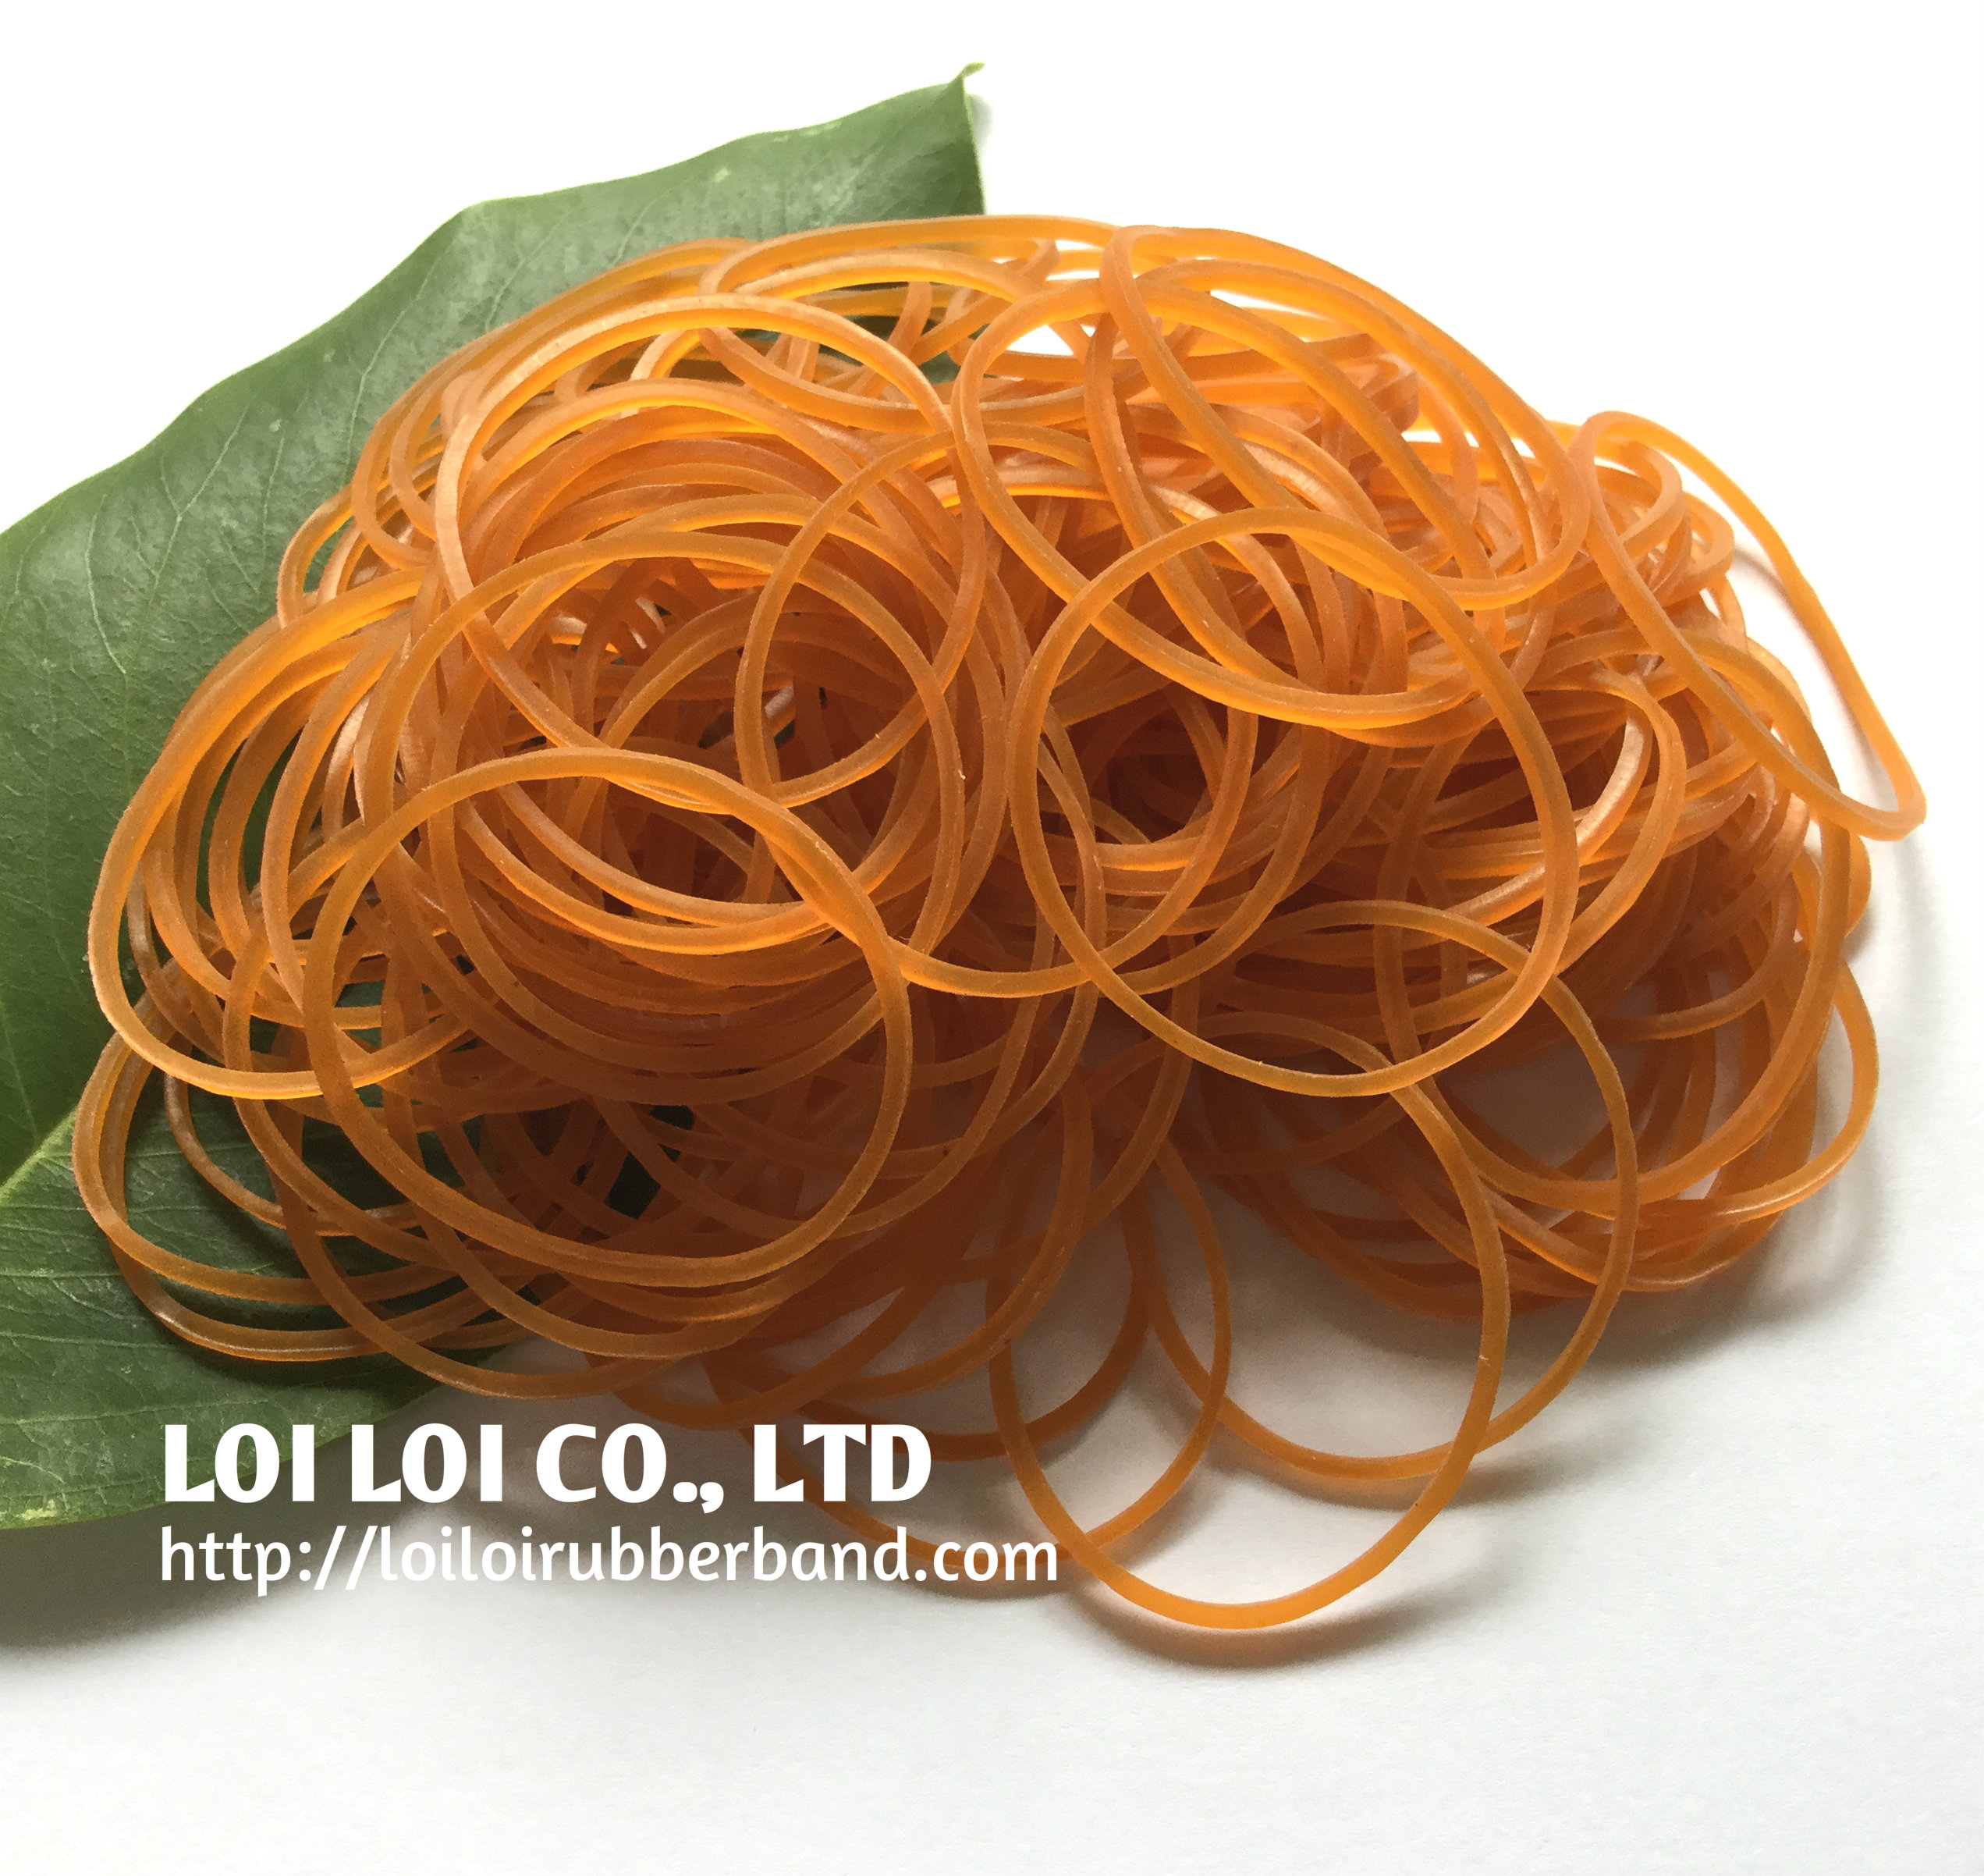 High-quality BEST selling Natural rubber band Size 32mm particularly export to Japan market / Rubber Band for Binding vegetable